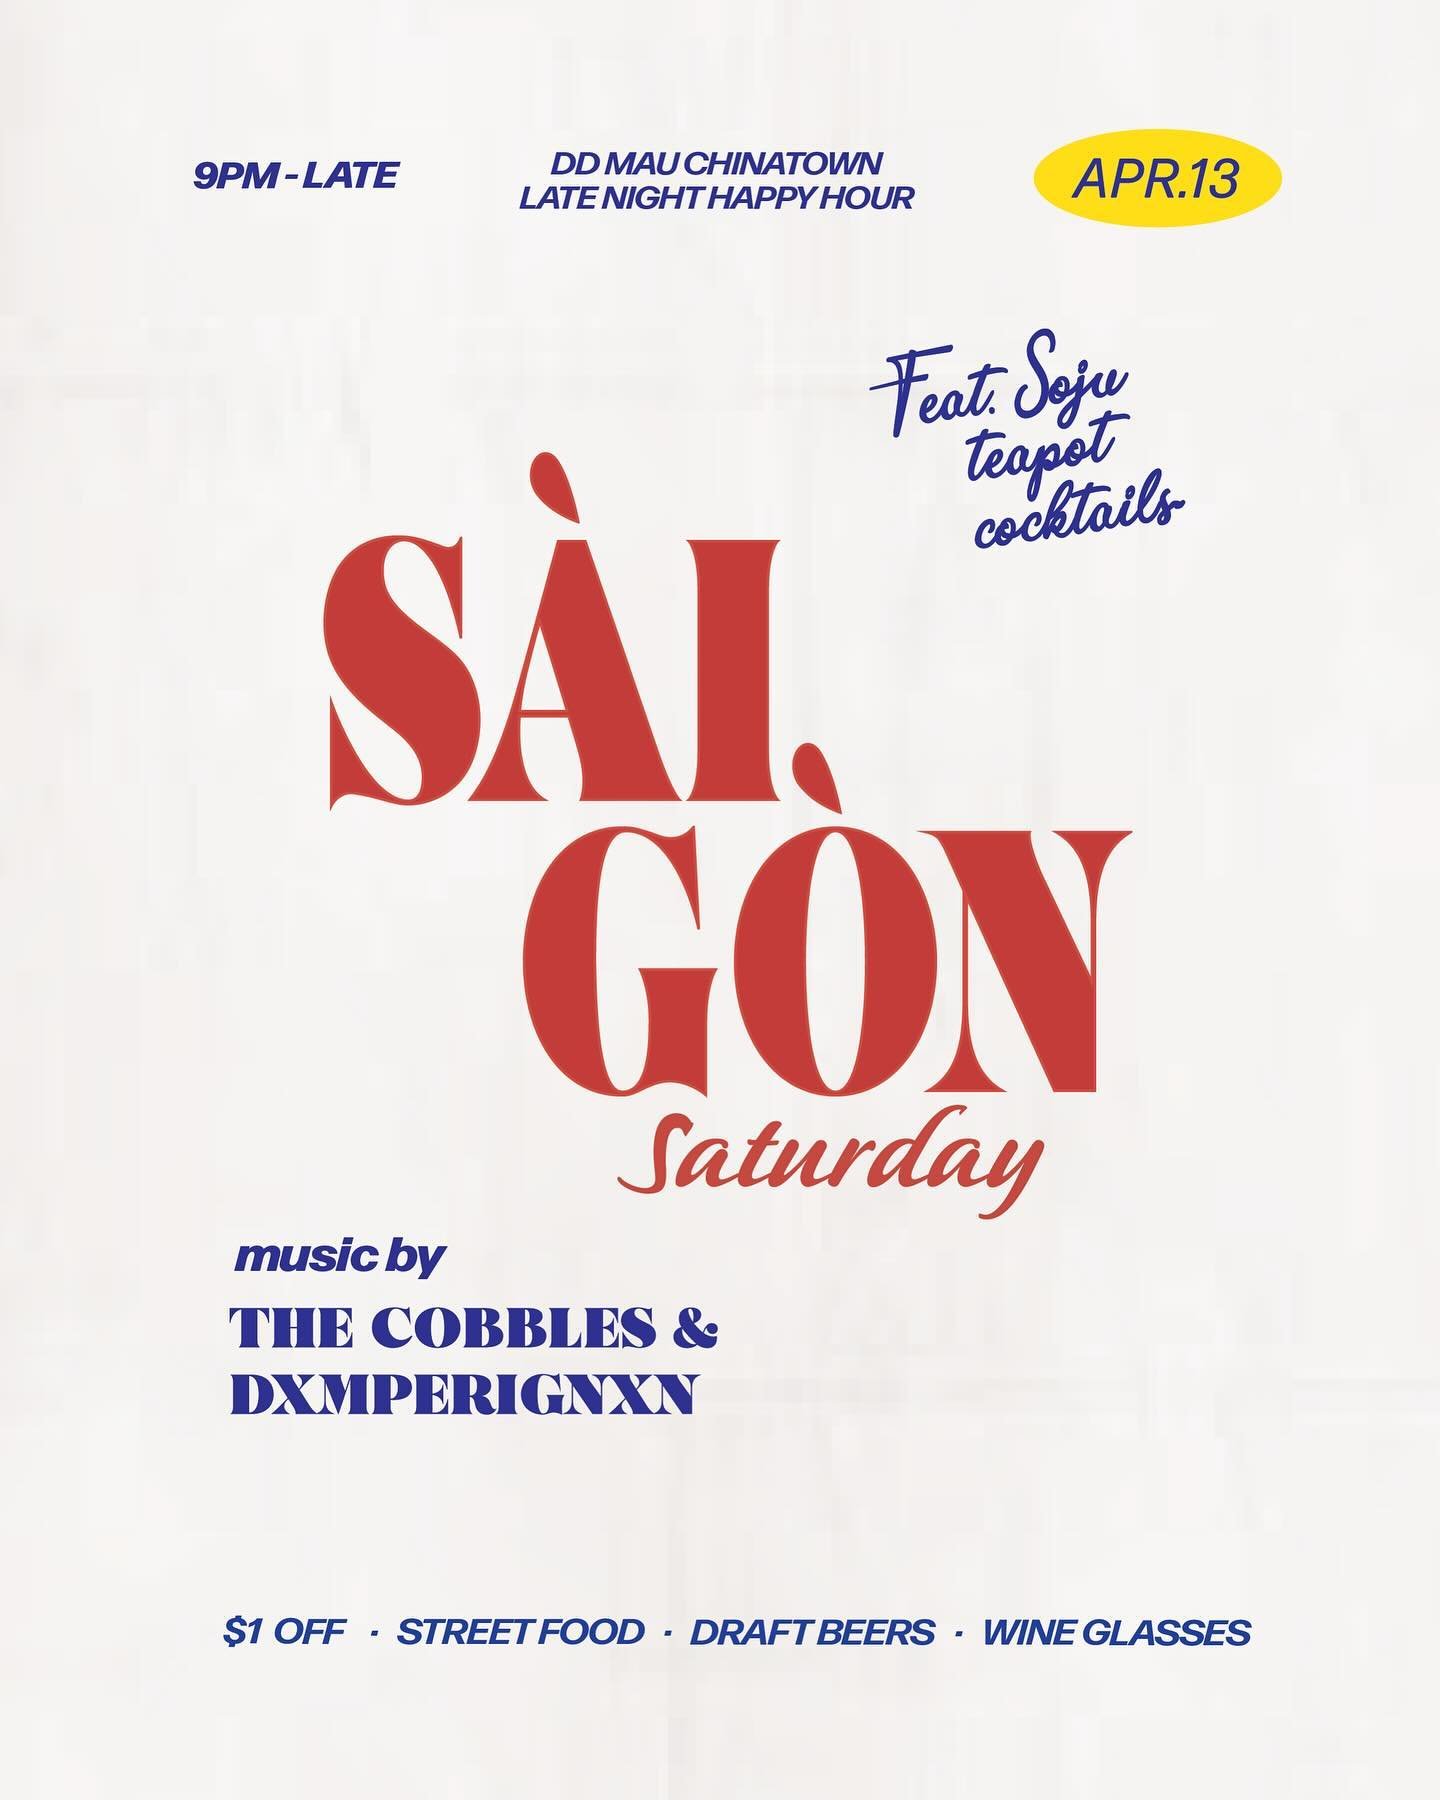 Saigon Saturday this Weekend! Join us for late night happy hour 🍻 from 9pm-late. Music starting at 8pm with @thecobbles &amp; @dxmperignxn 🎶

🌟$1 OFF Street Food Menu
🍺$1 OFF Draft Beers
🍷$1 OFF Wine Glasses
🍺$2 OFF Saigon Lager
🍹+ Soju Teapot